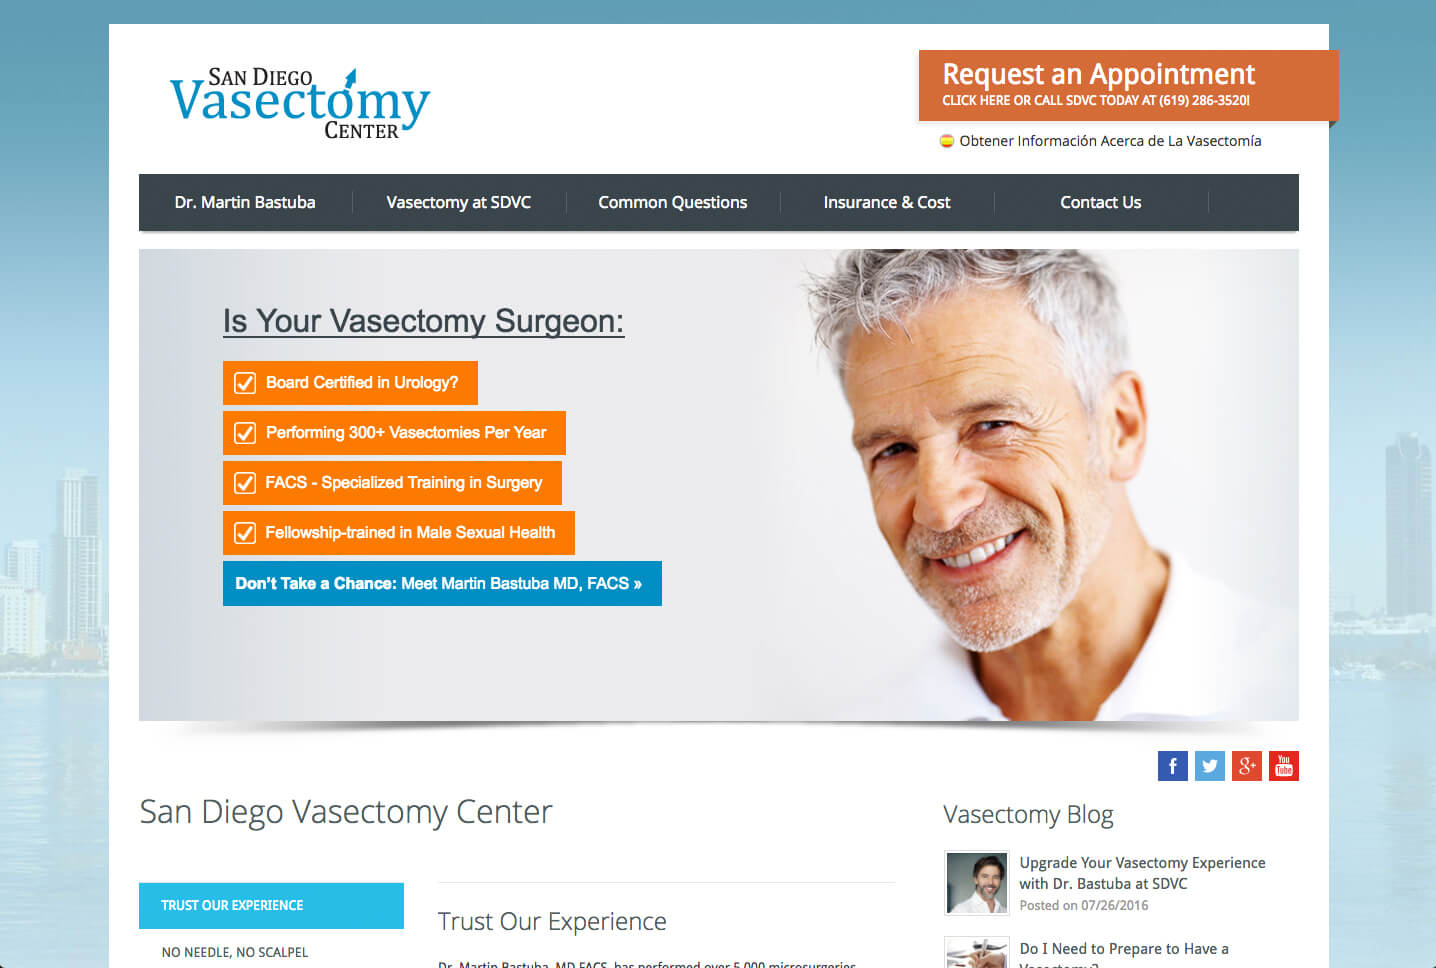 Introducing the San Diego Vasectomy Center: The Latest Website Launch from  IV Interactive